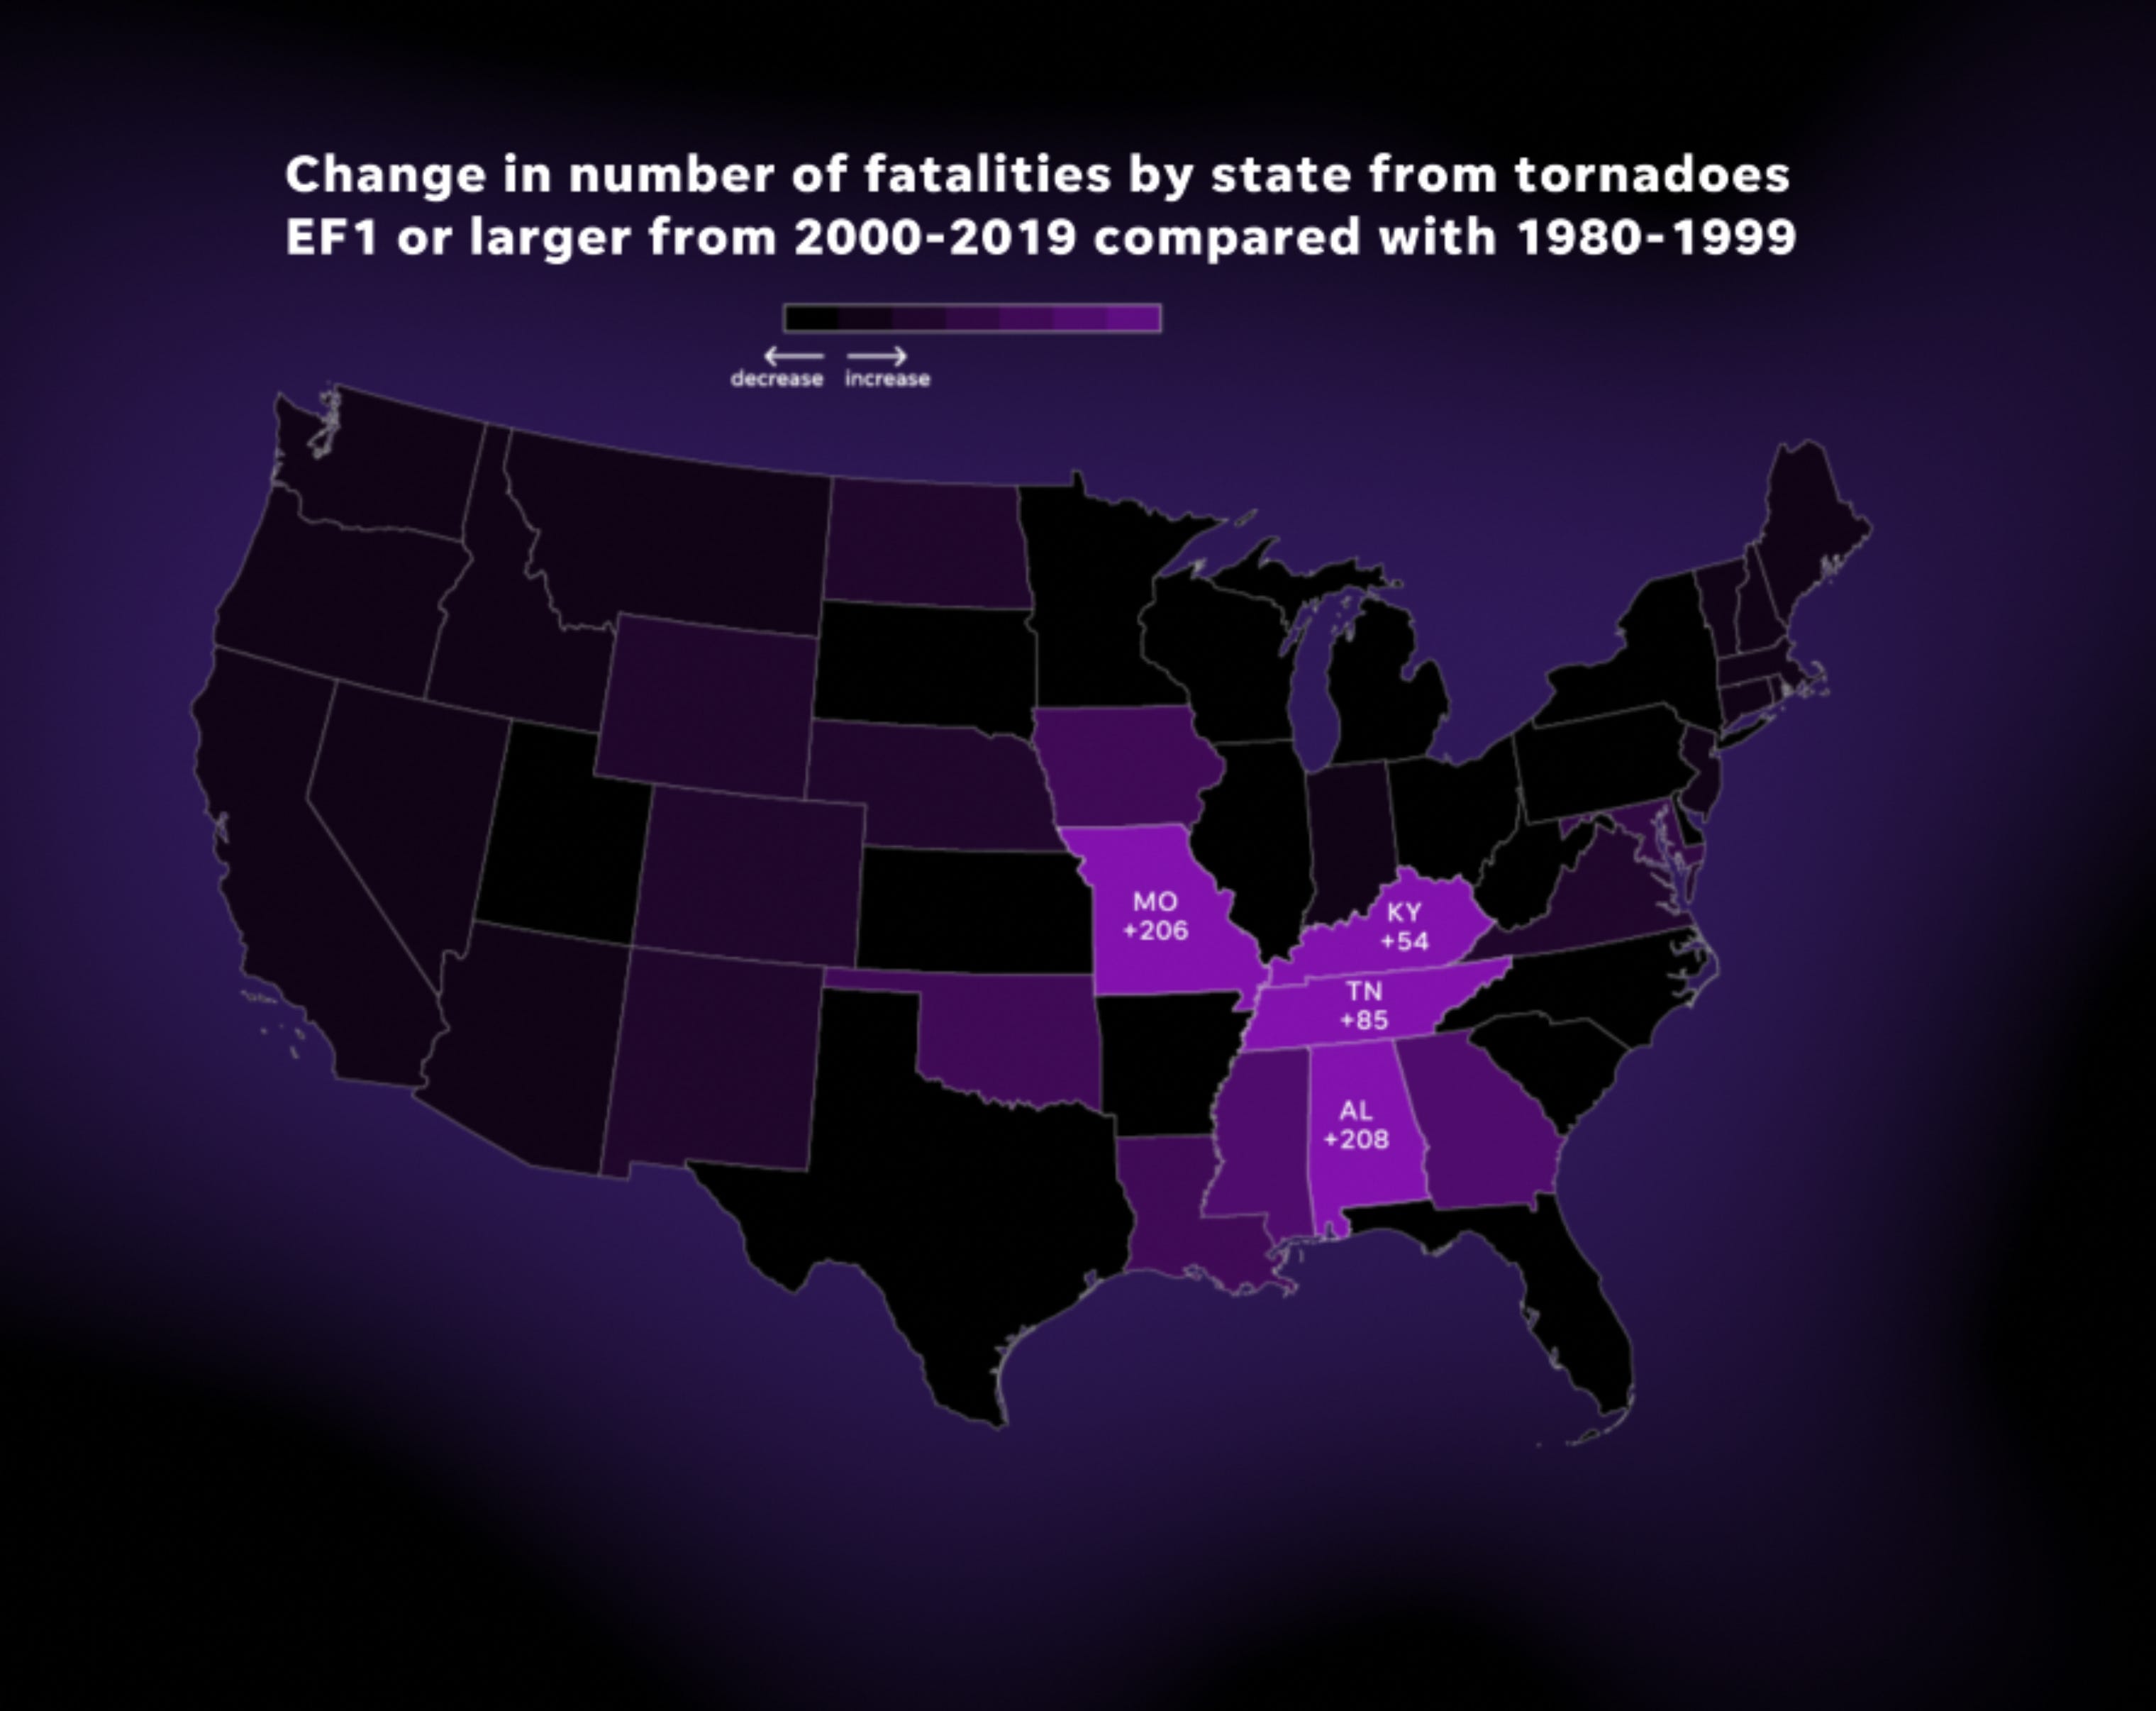 Change in fatalities by state when comparing 2000-2019 to 1980-1999.